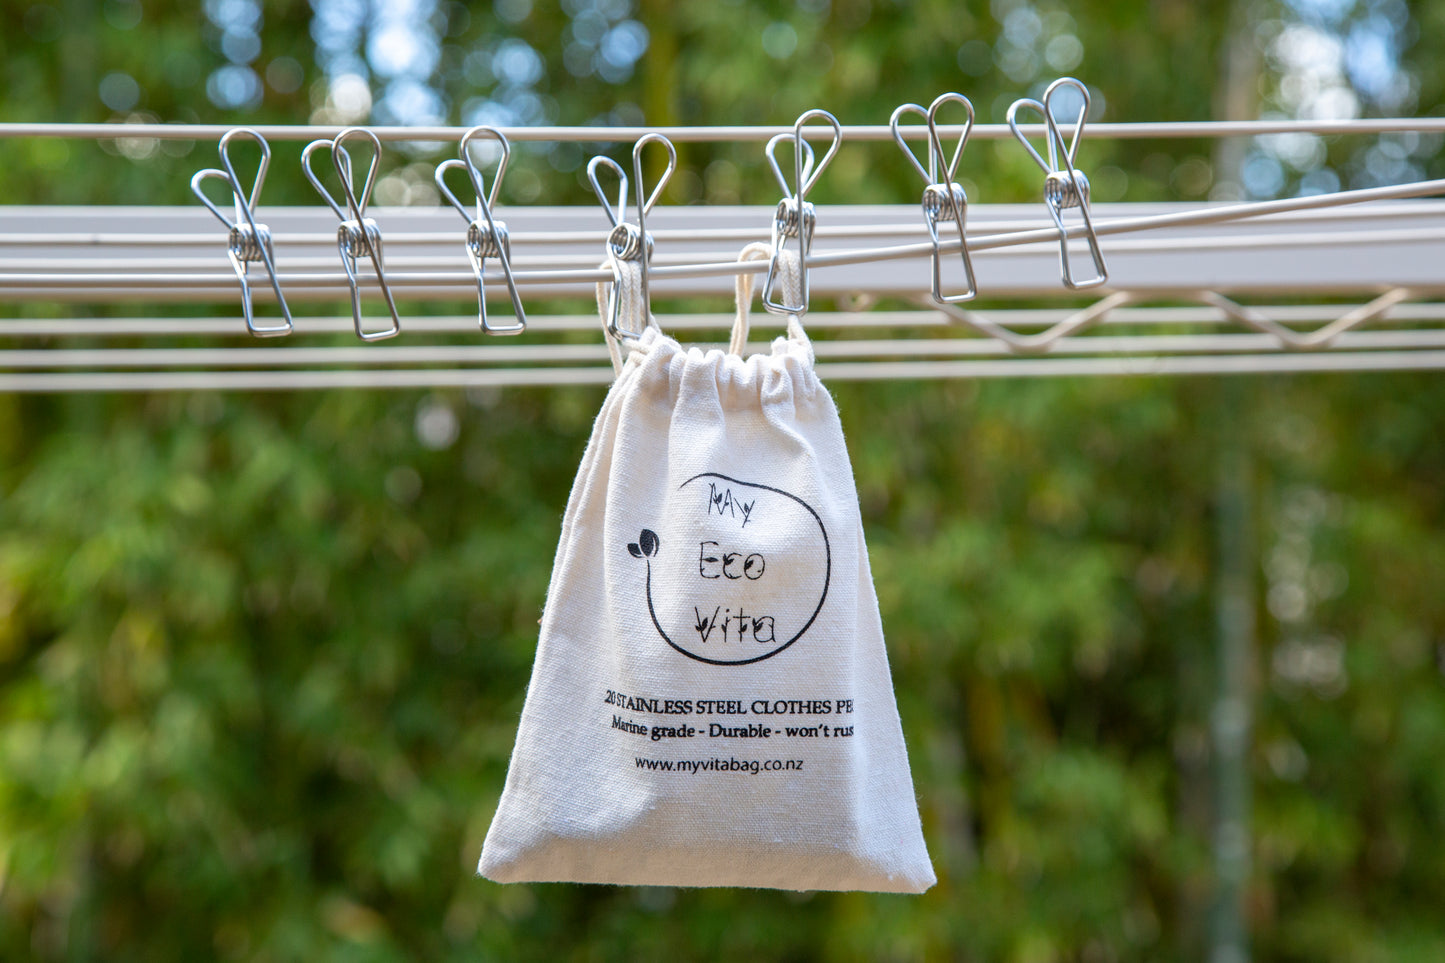 Sale: Stainless Steel Clothes Pegs +Set of Organic Produce Bags